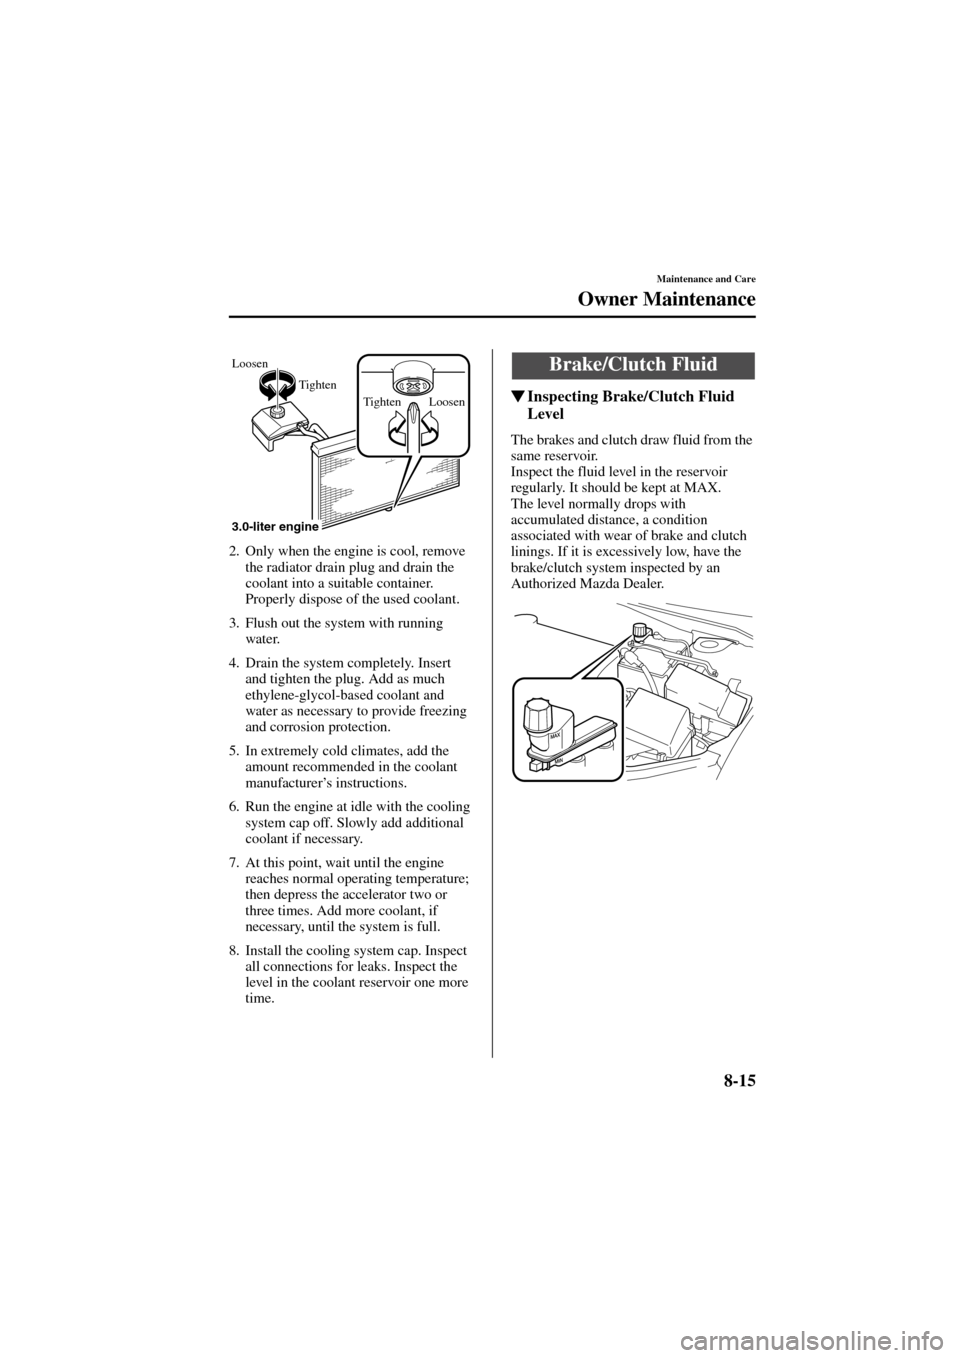 MAZDA MODEL 6 2004  Owners Manual (in English) 8-15
Maintenance and Care
Owner Maintenance
Form No. 8R29-EA-02I
2. Only when the engine is cool, remove 
the radiator drain plug and drain the 
coolant into a suitable container. 
Properly dispose of